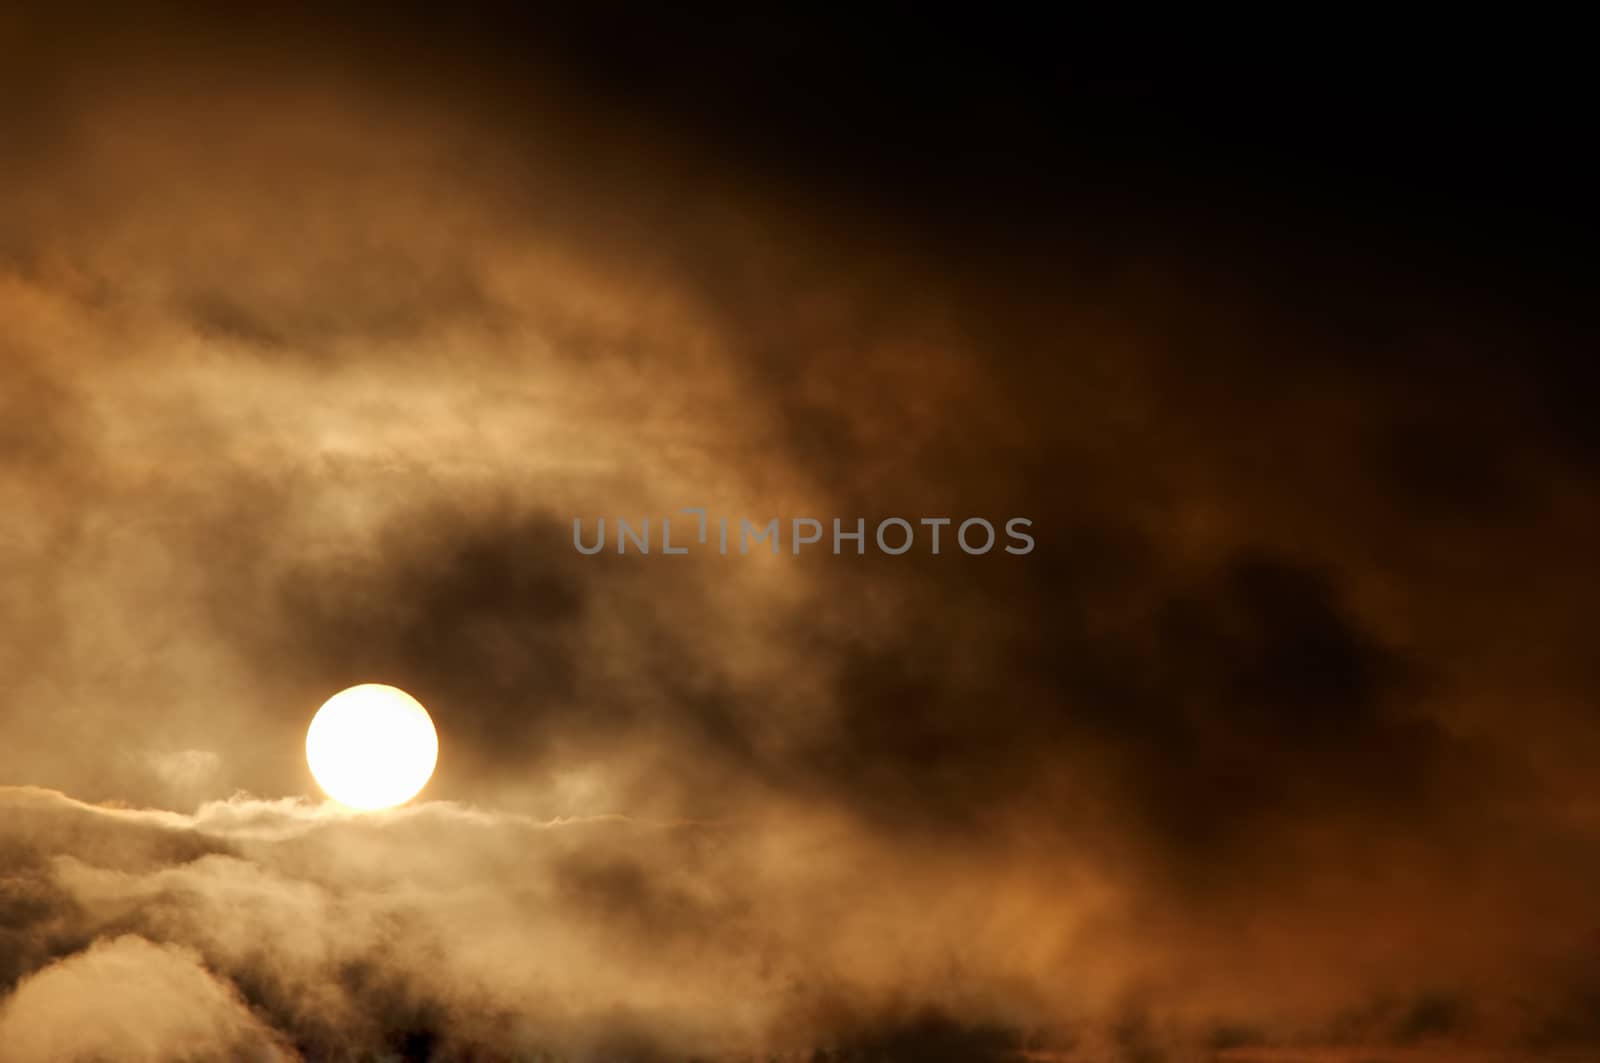 Abstract image of the dark storm clouds and setting sun